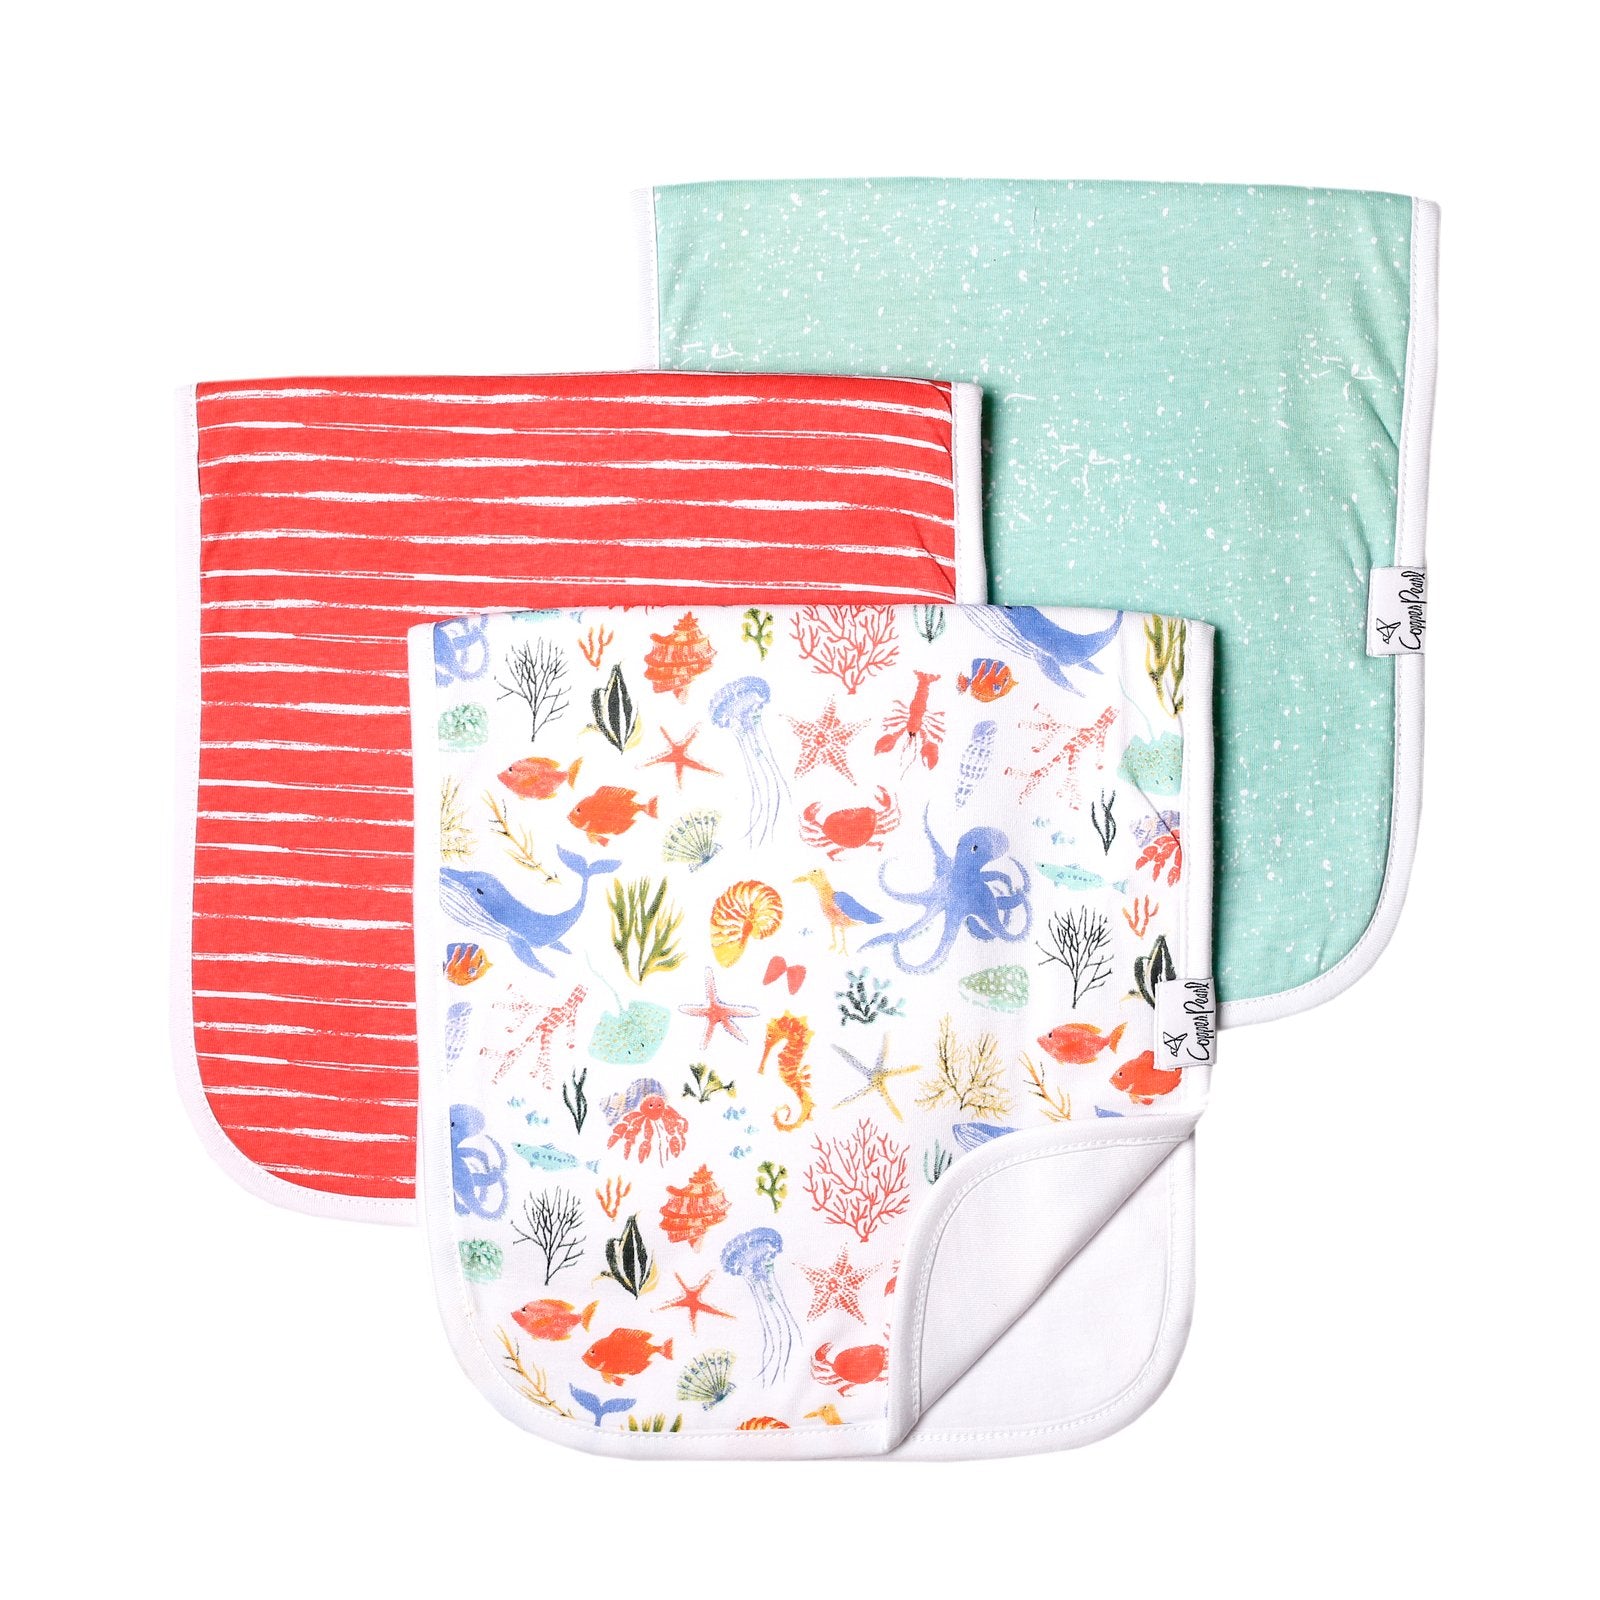 3 designs of burp cloth included in set